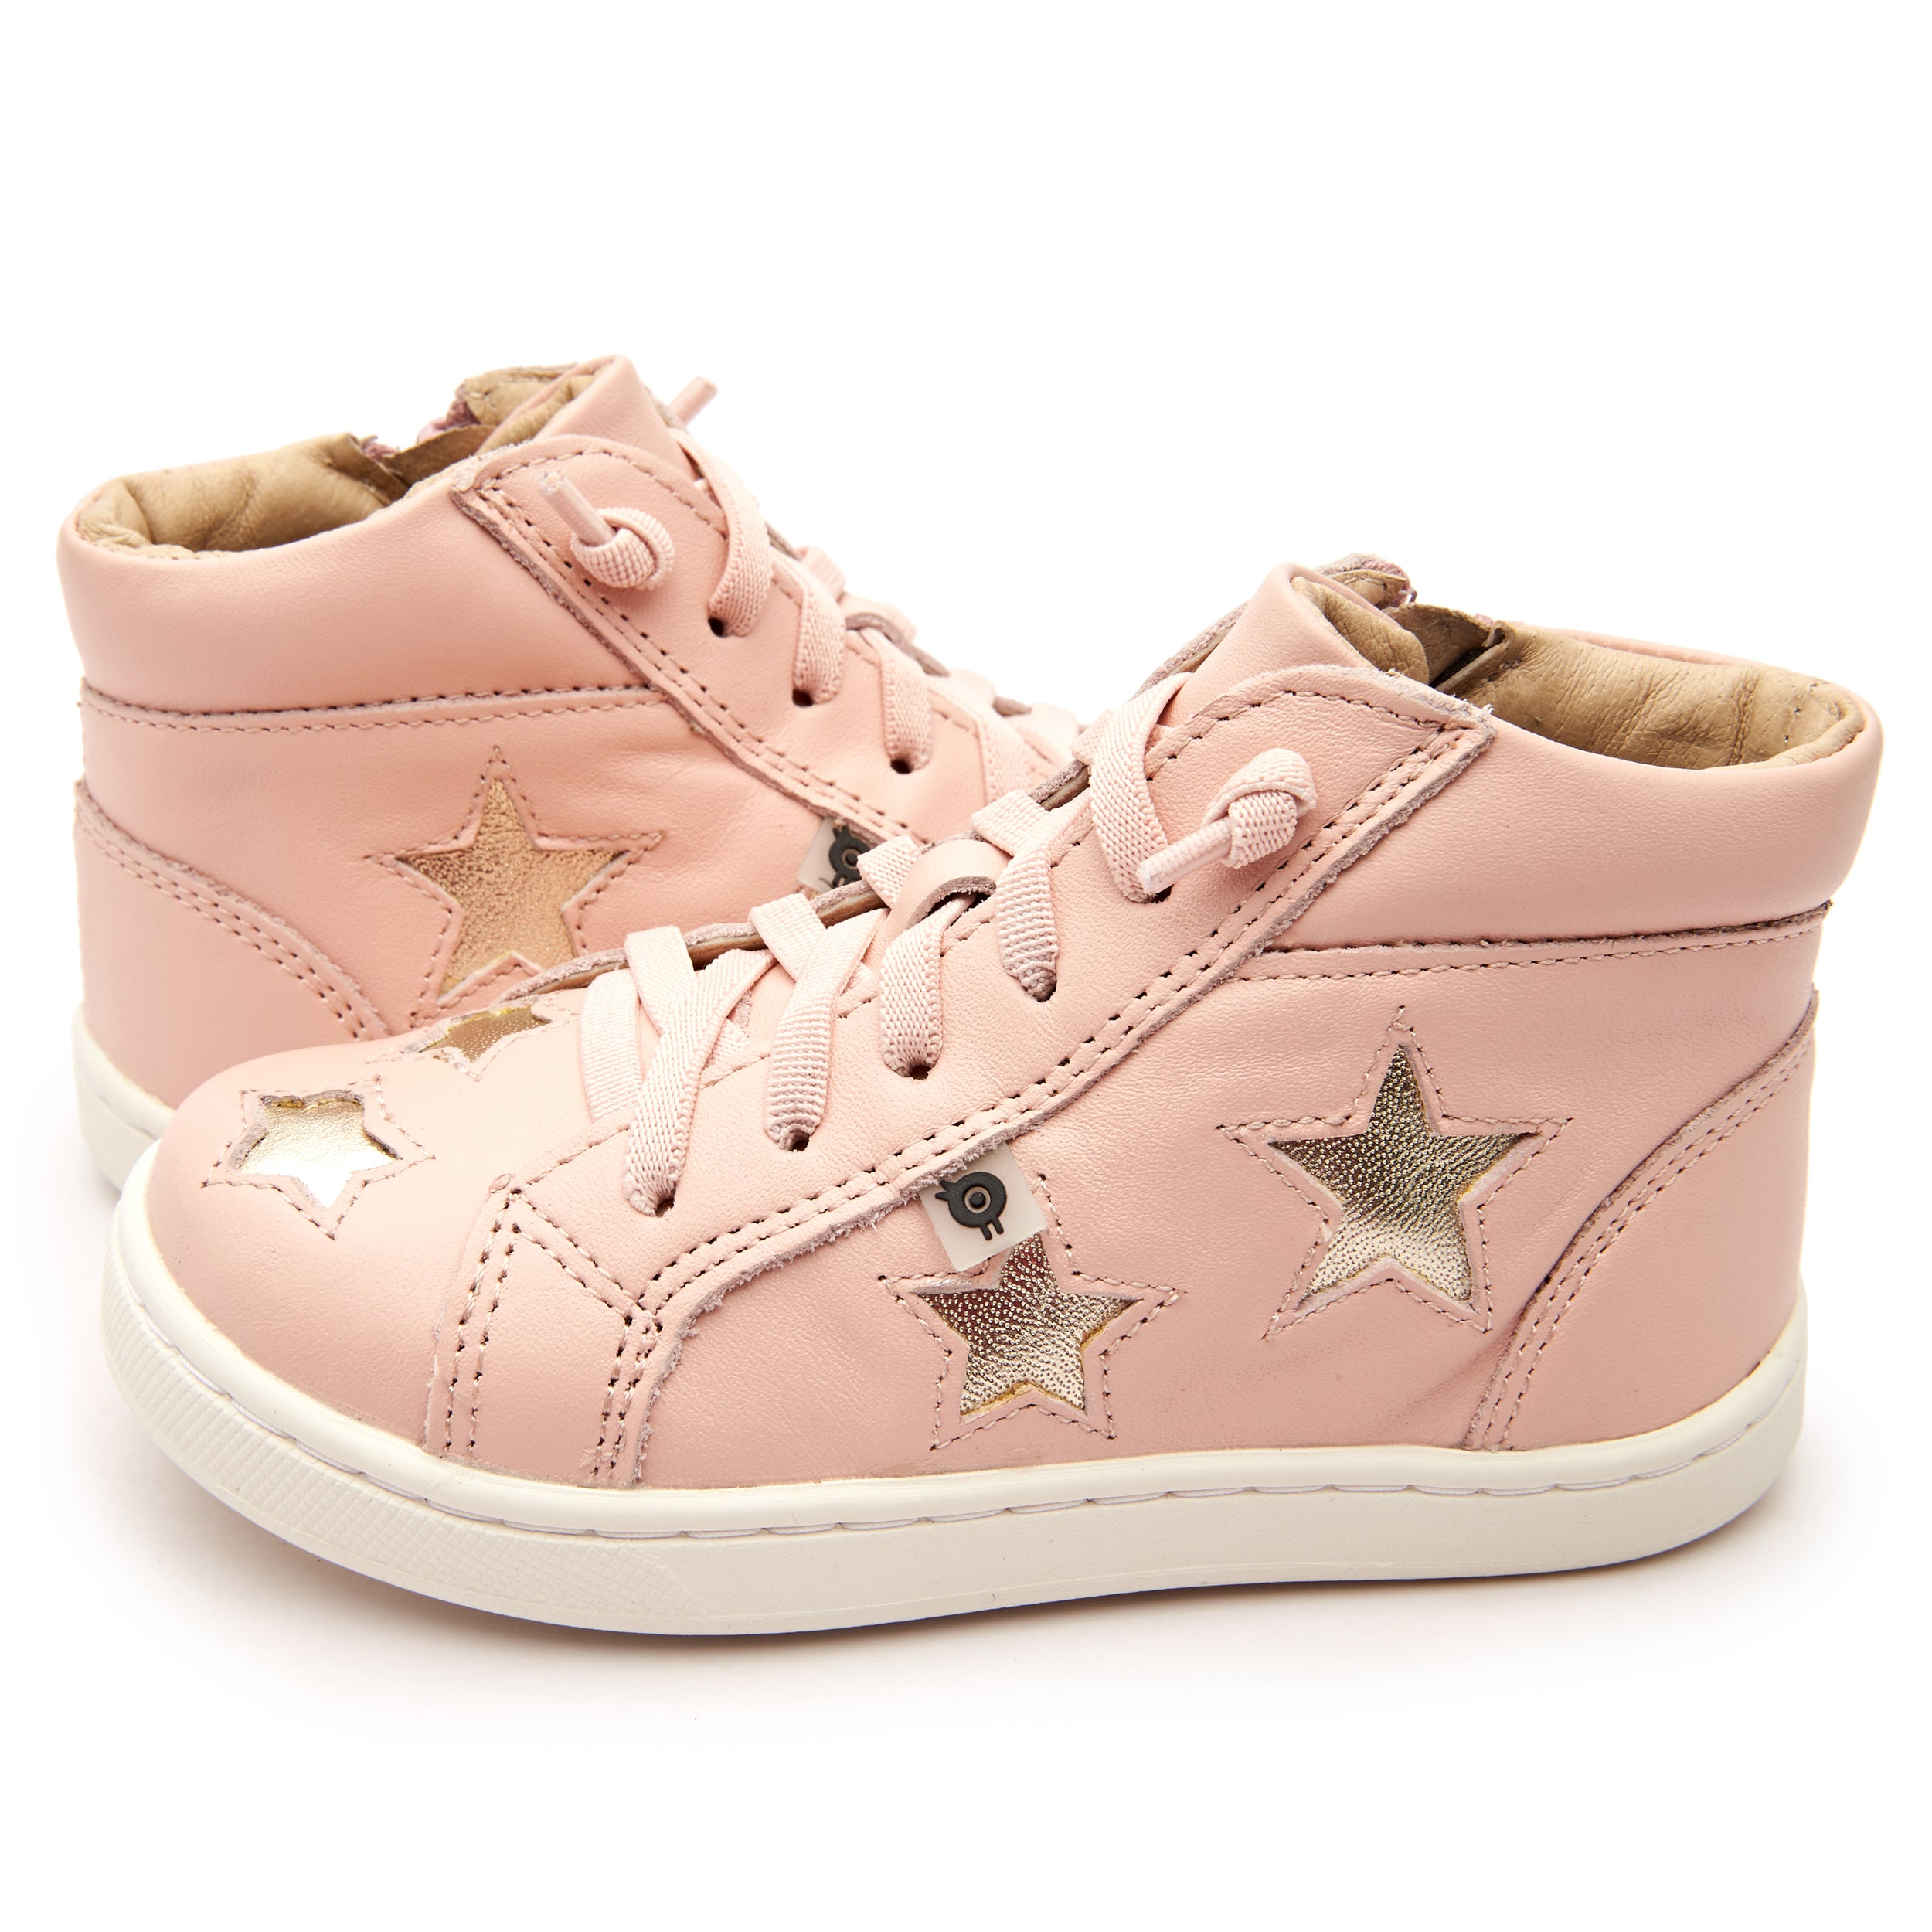 Old Soles - Starey High Top - Powder Pink/ Gold